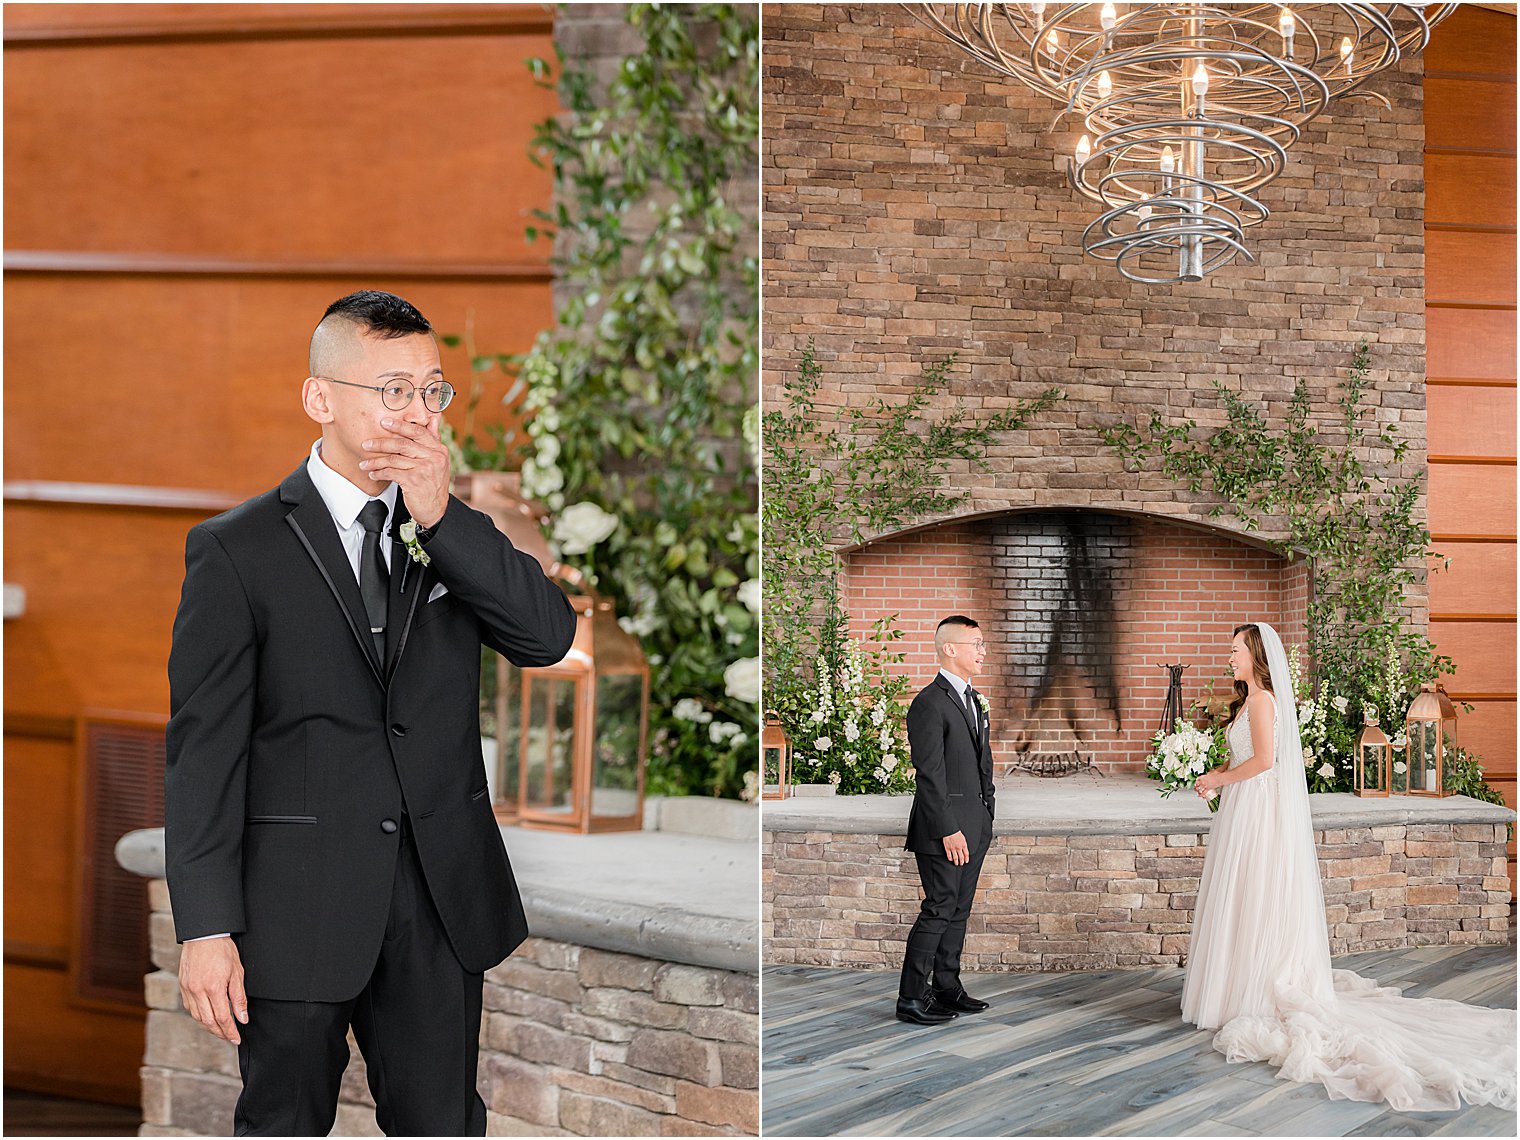 groom cries during first look by stone fireplace